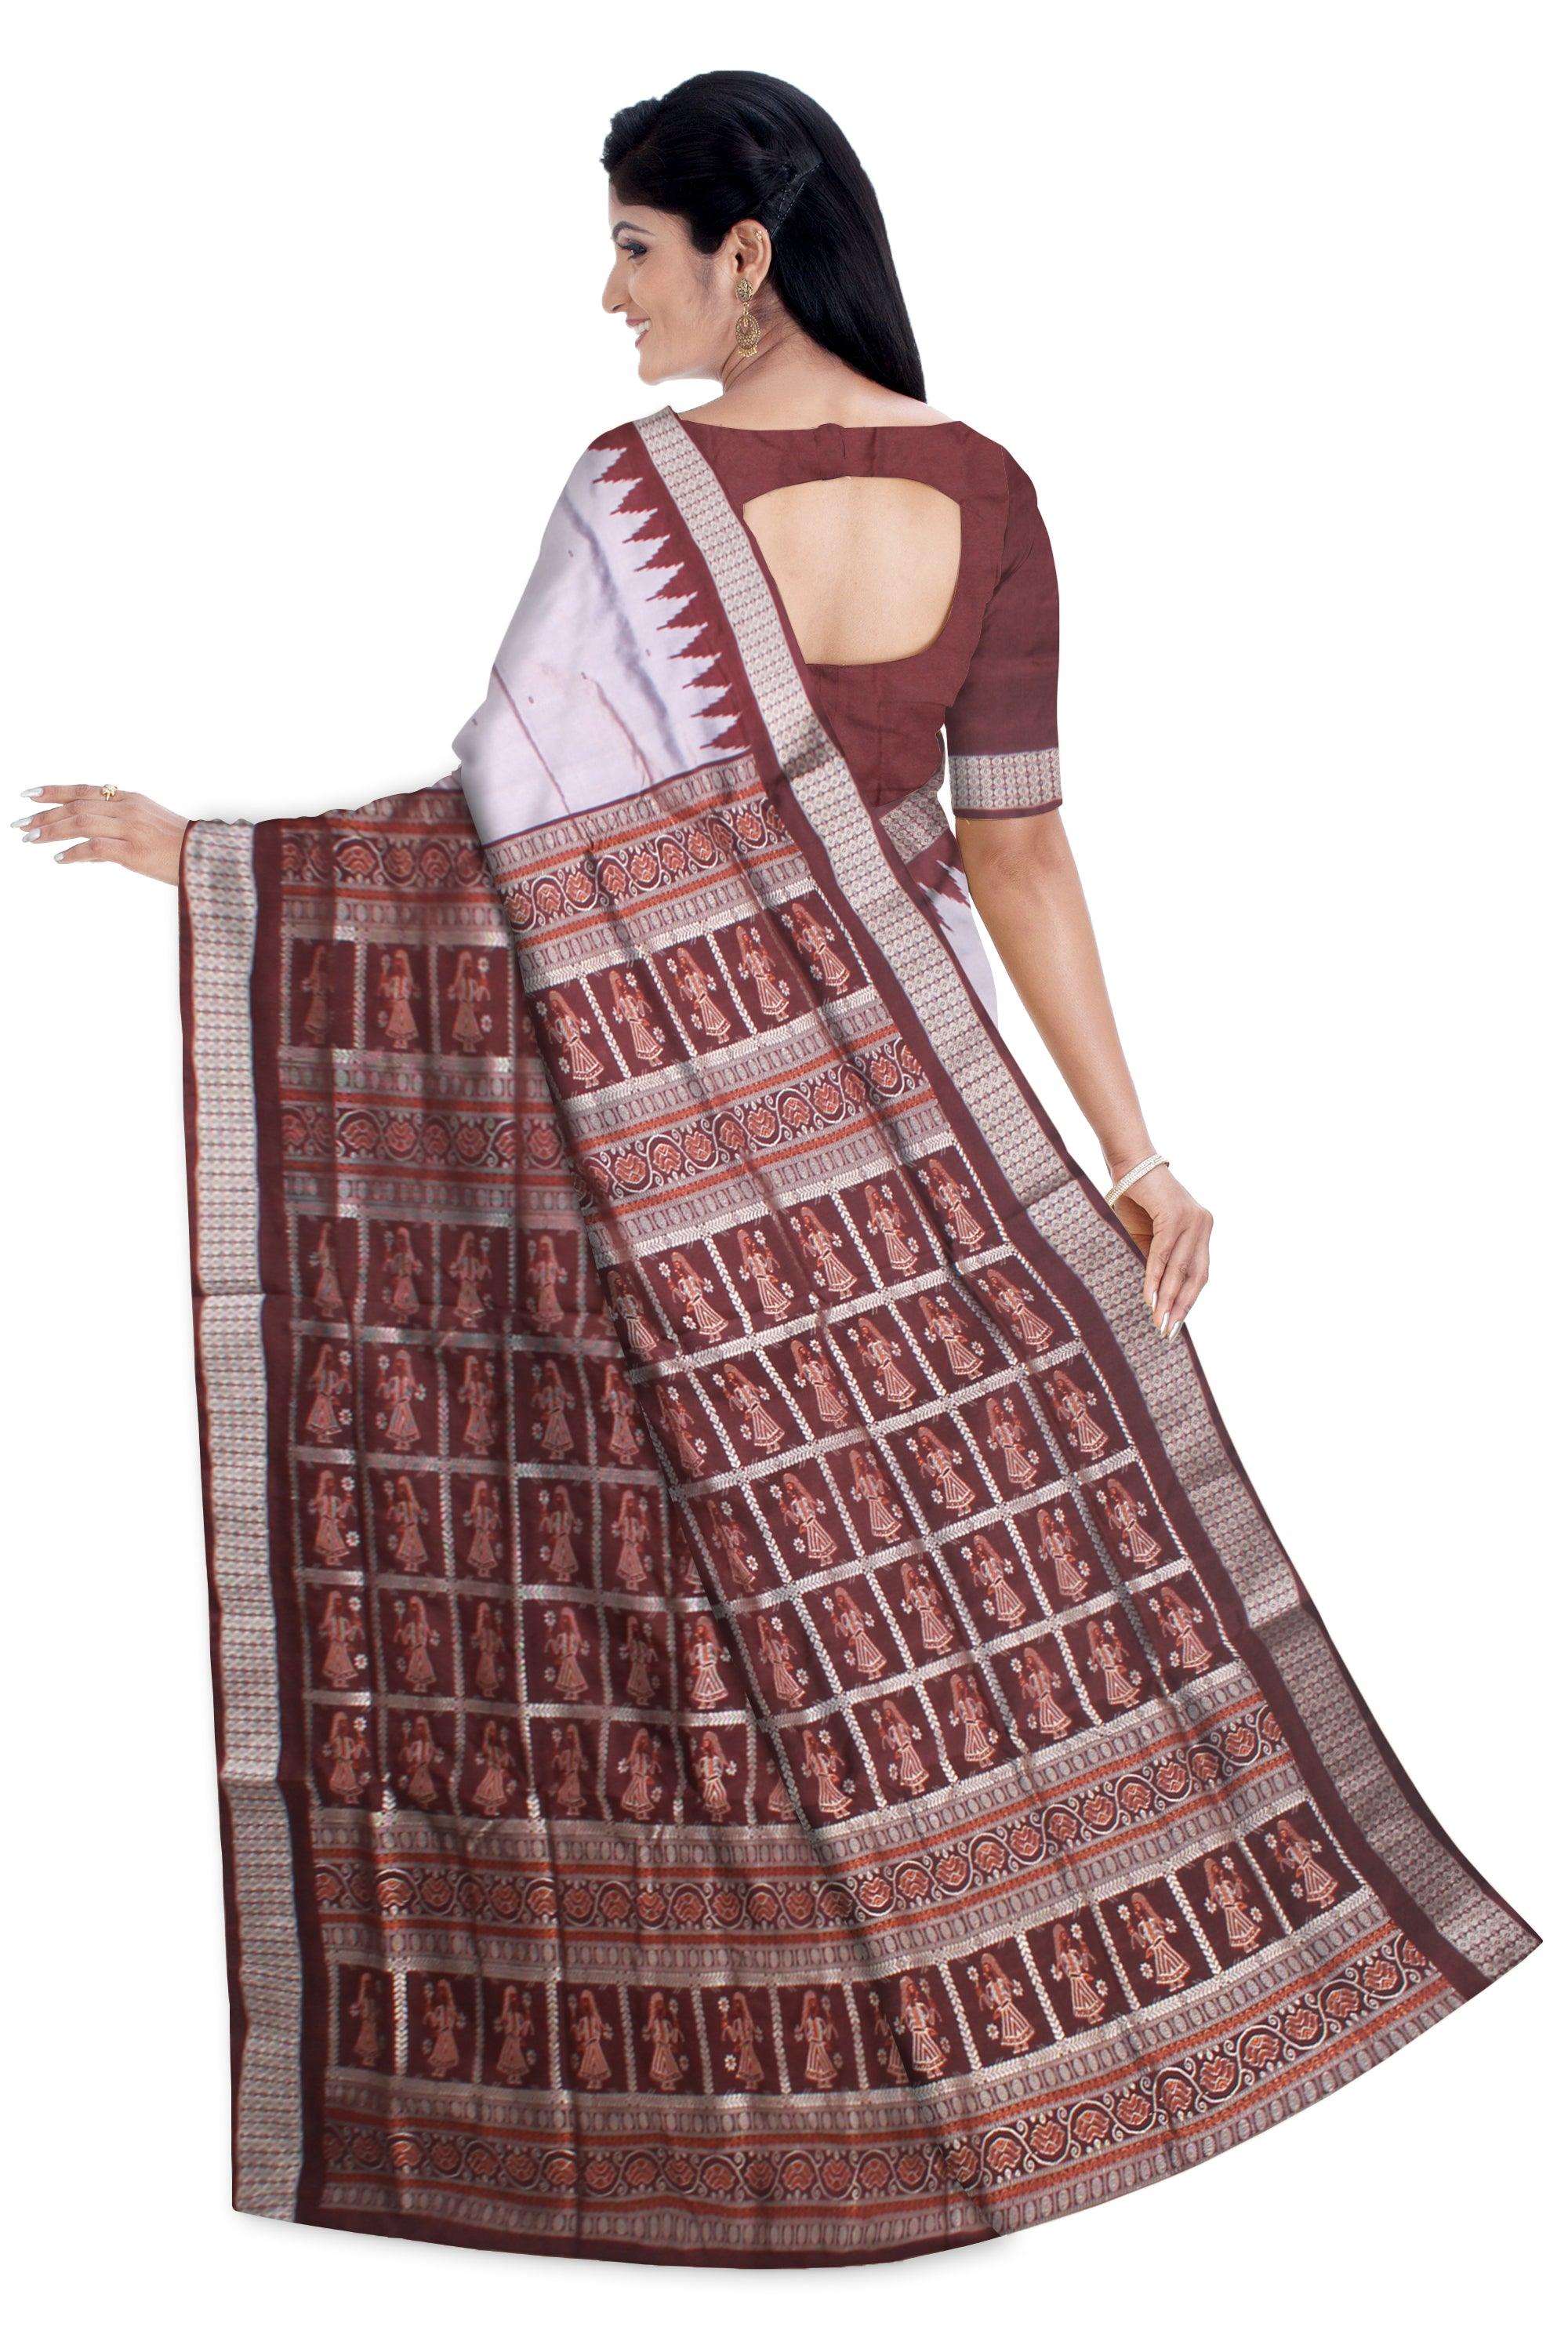 SMALL BOOTY PATTERN PATA SAREE IS SILVER AND COFFEE COLOR BASE, ATTACHED WITH BLOUSE PIECE. - Koshali Arts & Crafts Enterprise